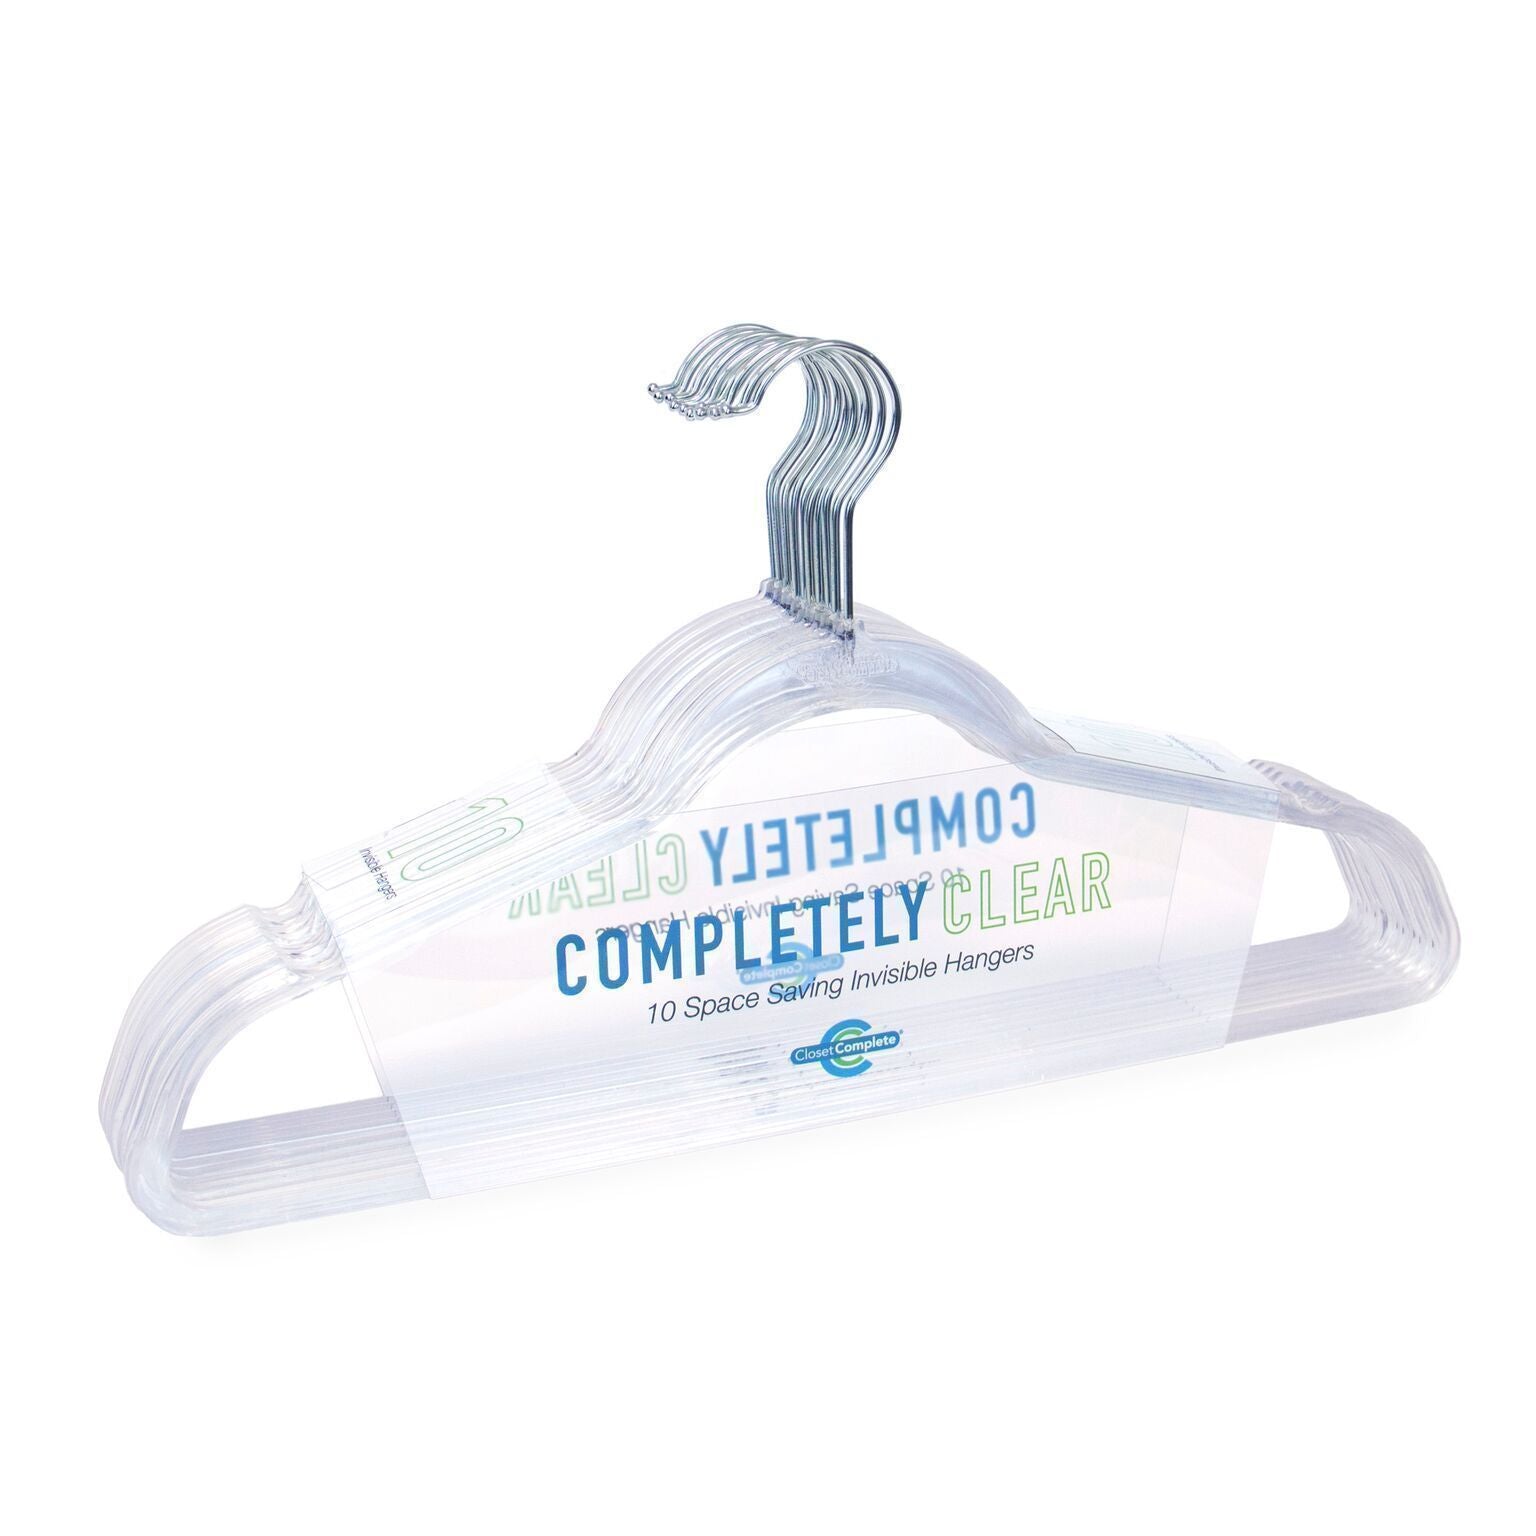 Completely Clear Acrylic Hangers  Space Saving Invisible Hangers